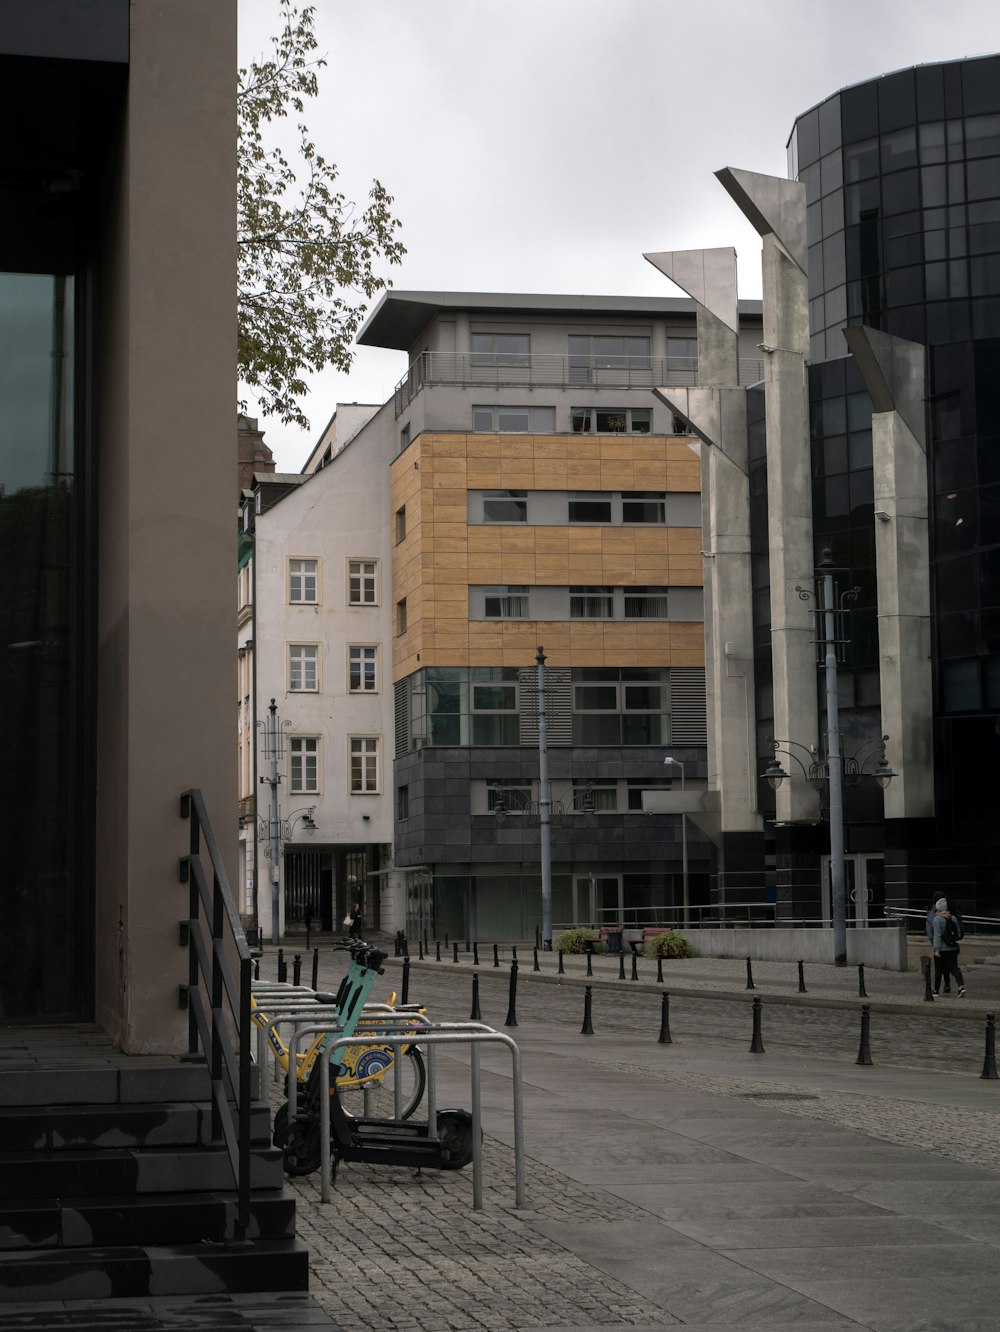 a person sitting on a bench in front of a building